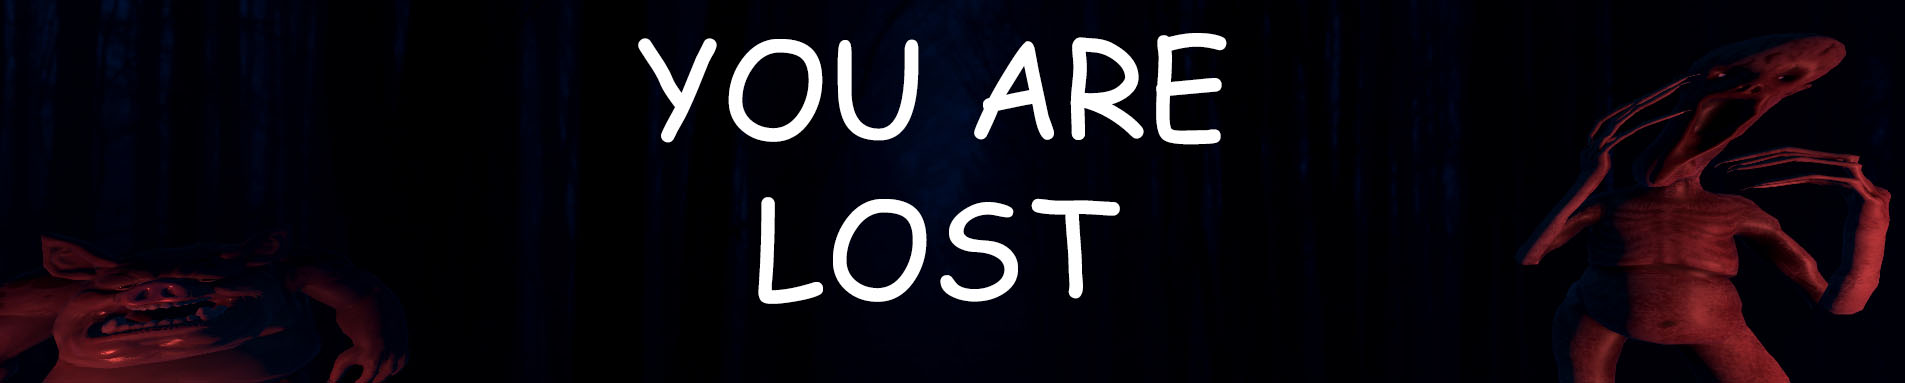 You are lost